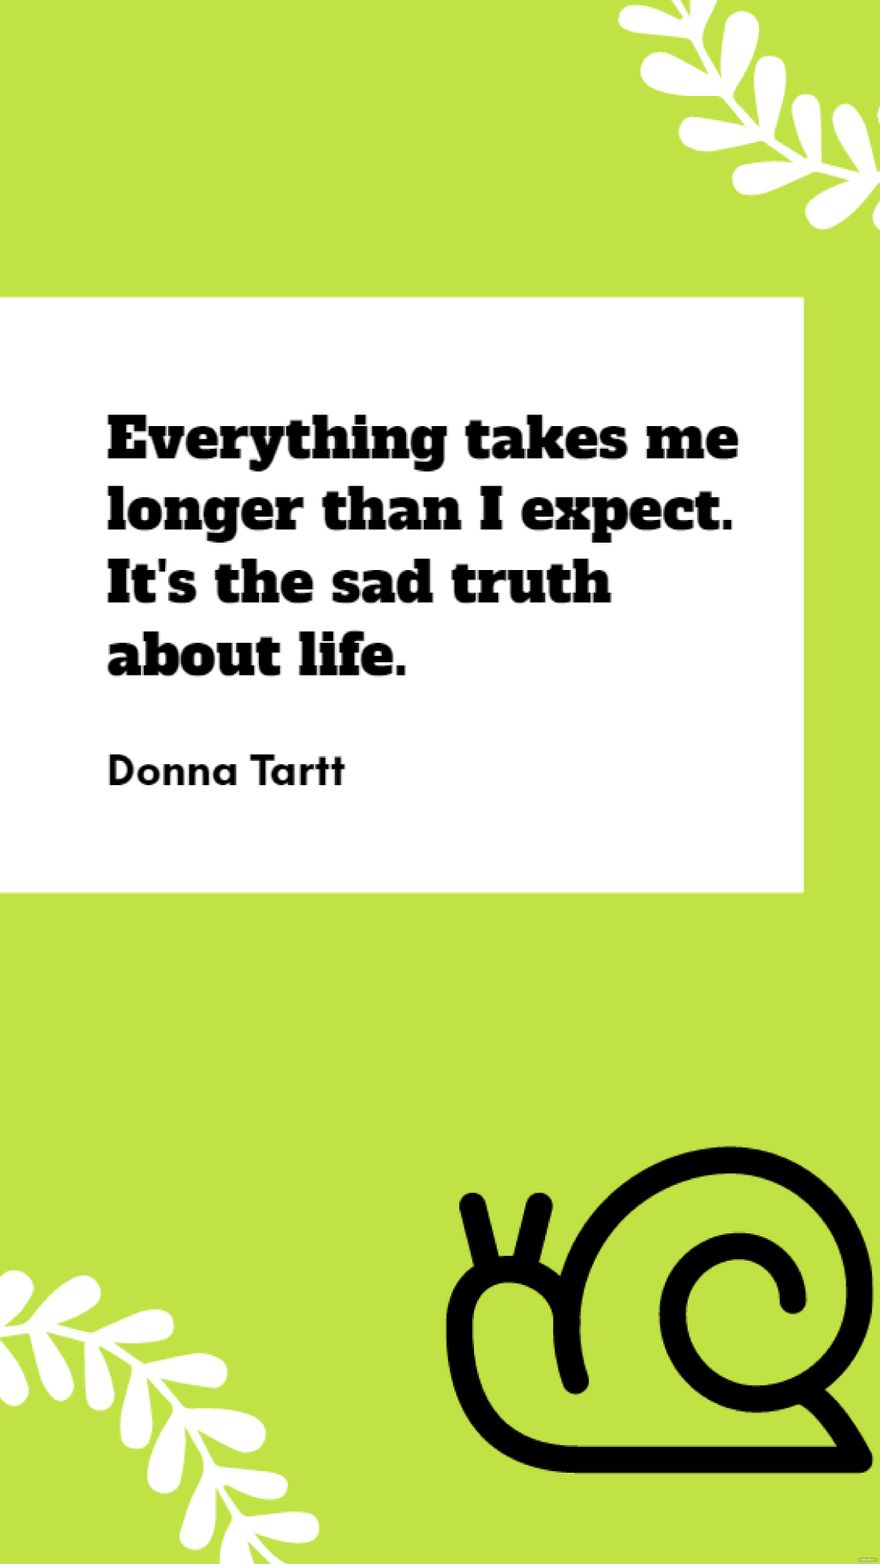 Donna Tartt - Everything takes me longer than I expect. It's the sad truth about life.